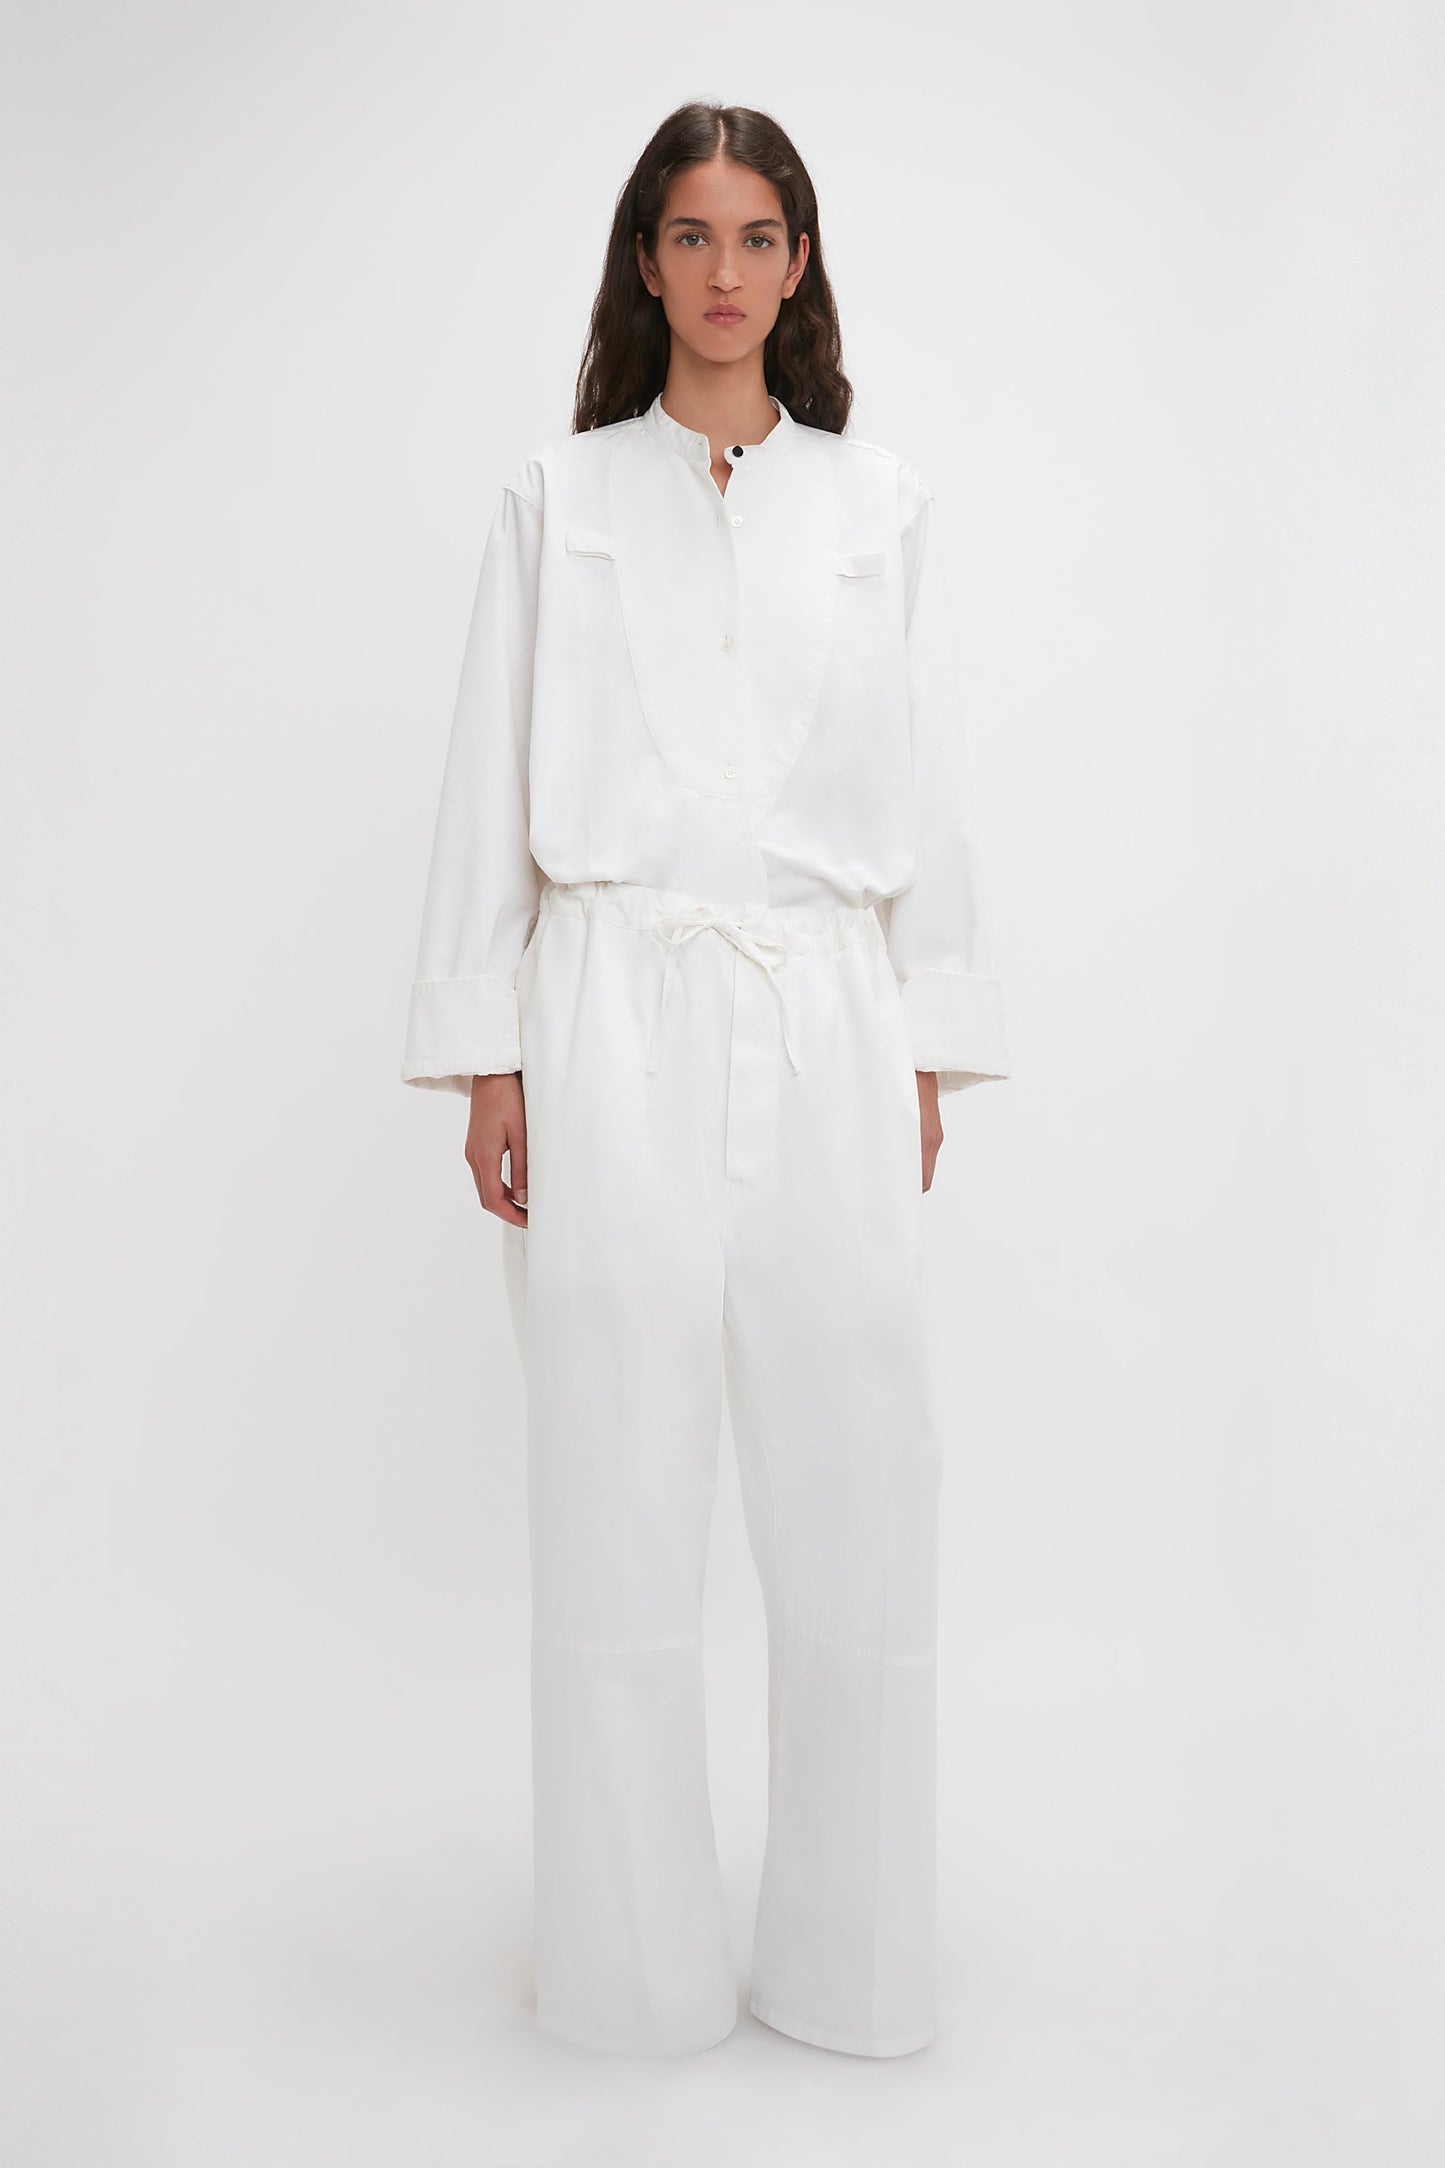 A woman in Victoria Beckham's drawstring pyjama trousers in washed white stands against a plain background, facing forward with a neutral expression.